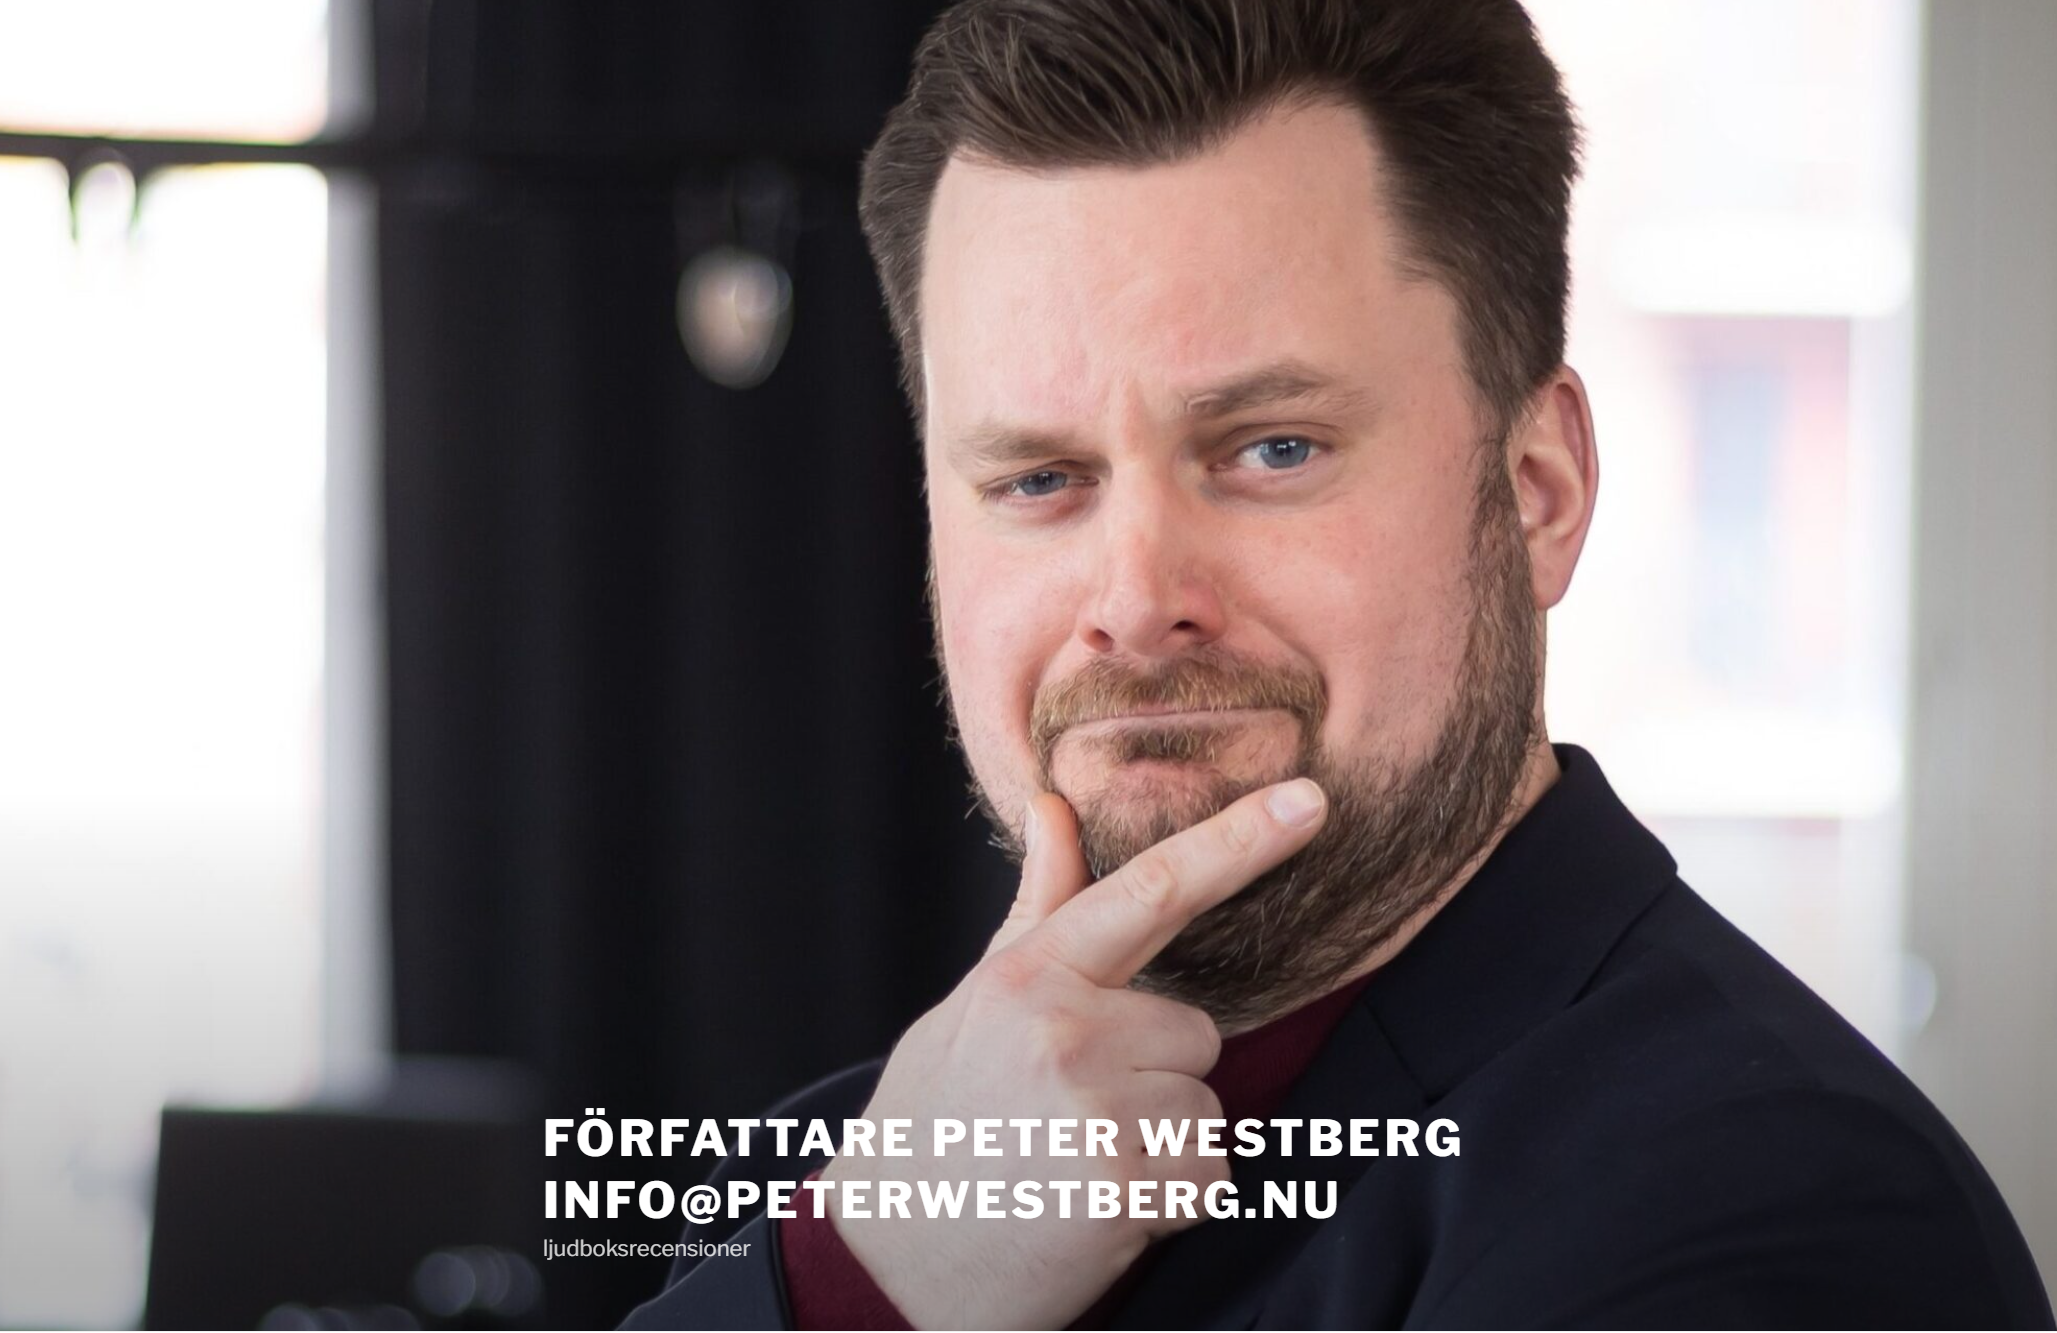 A screenshot of the author Peter Westberg